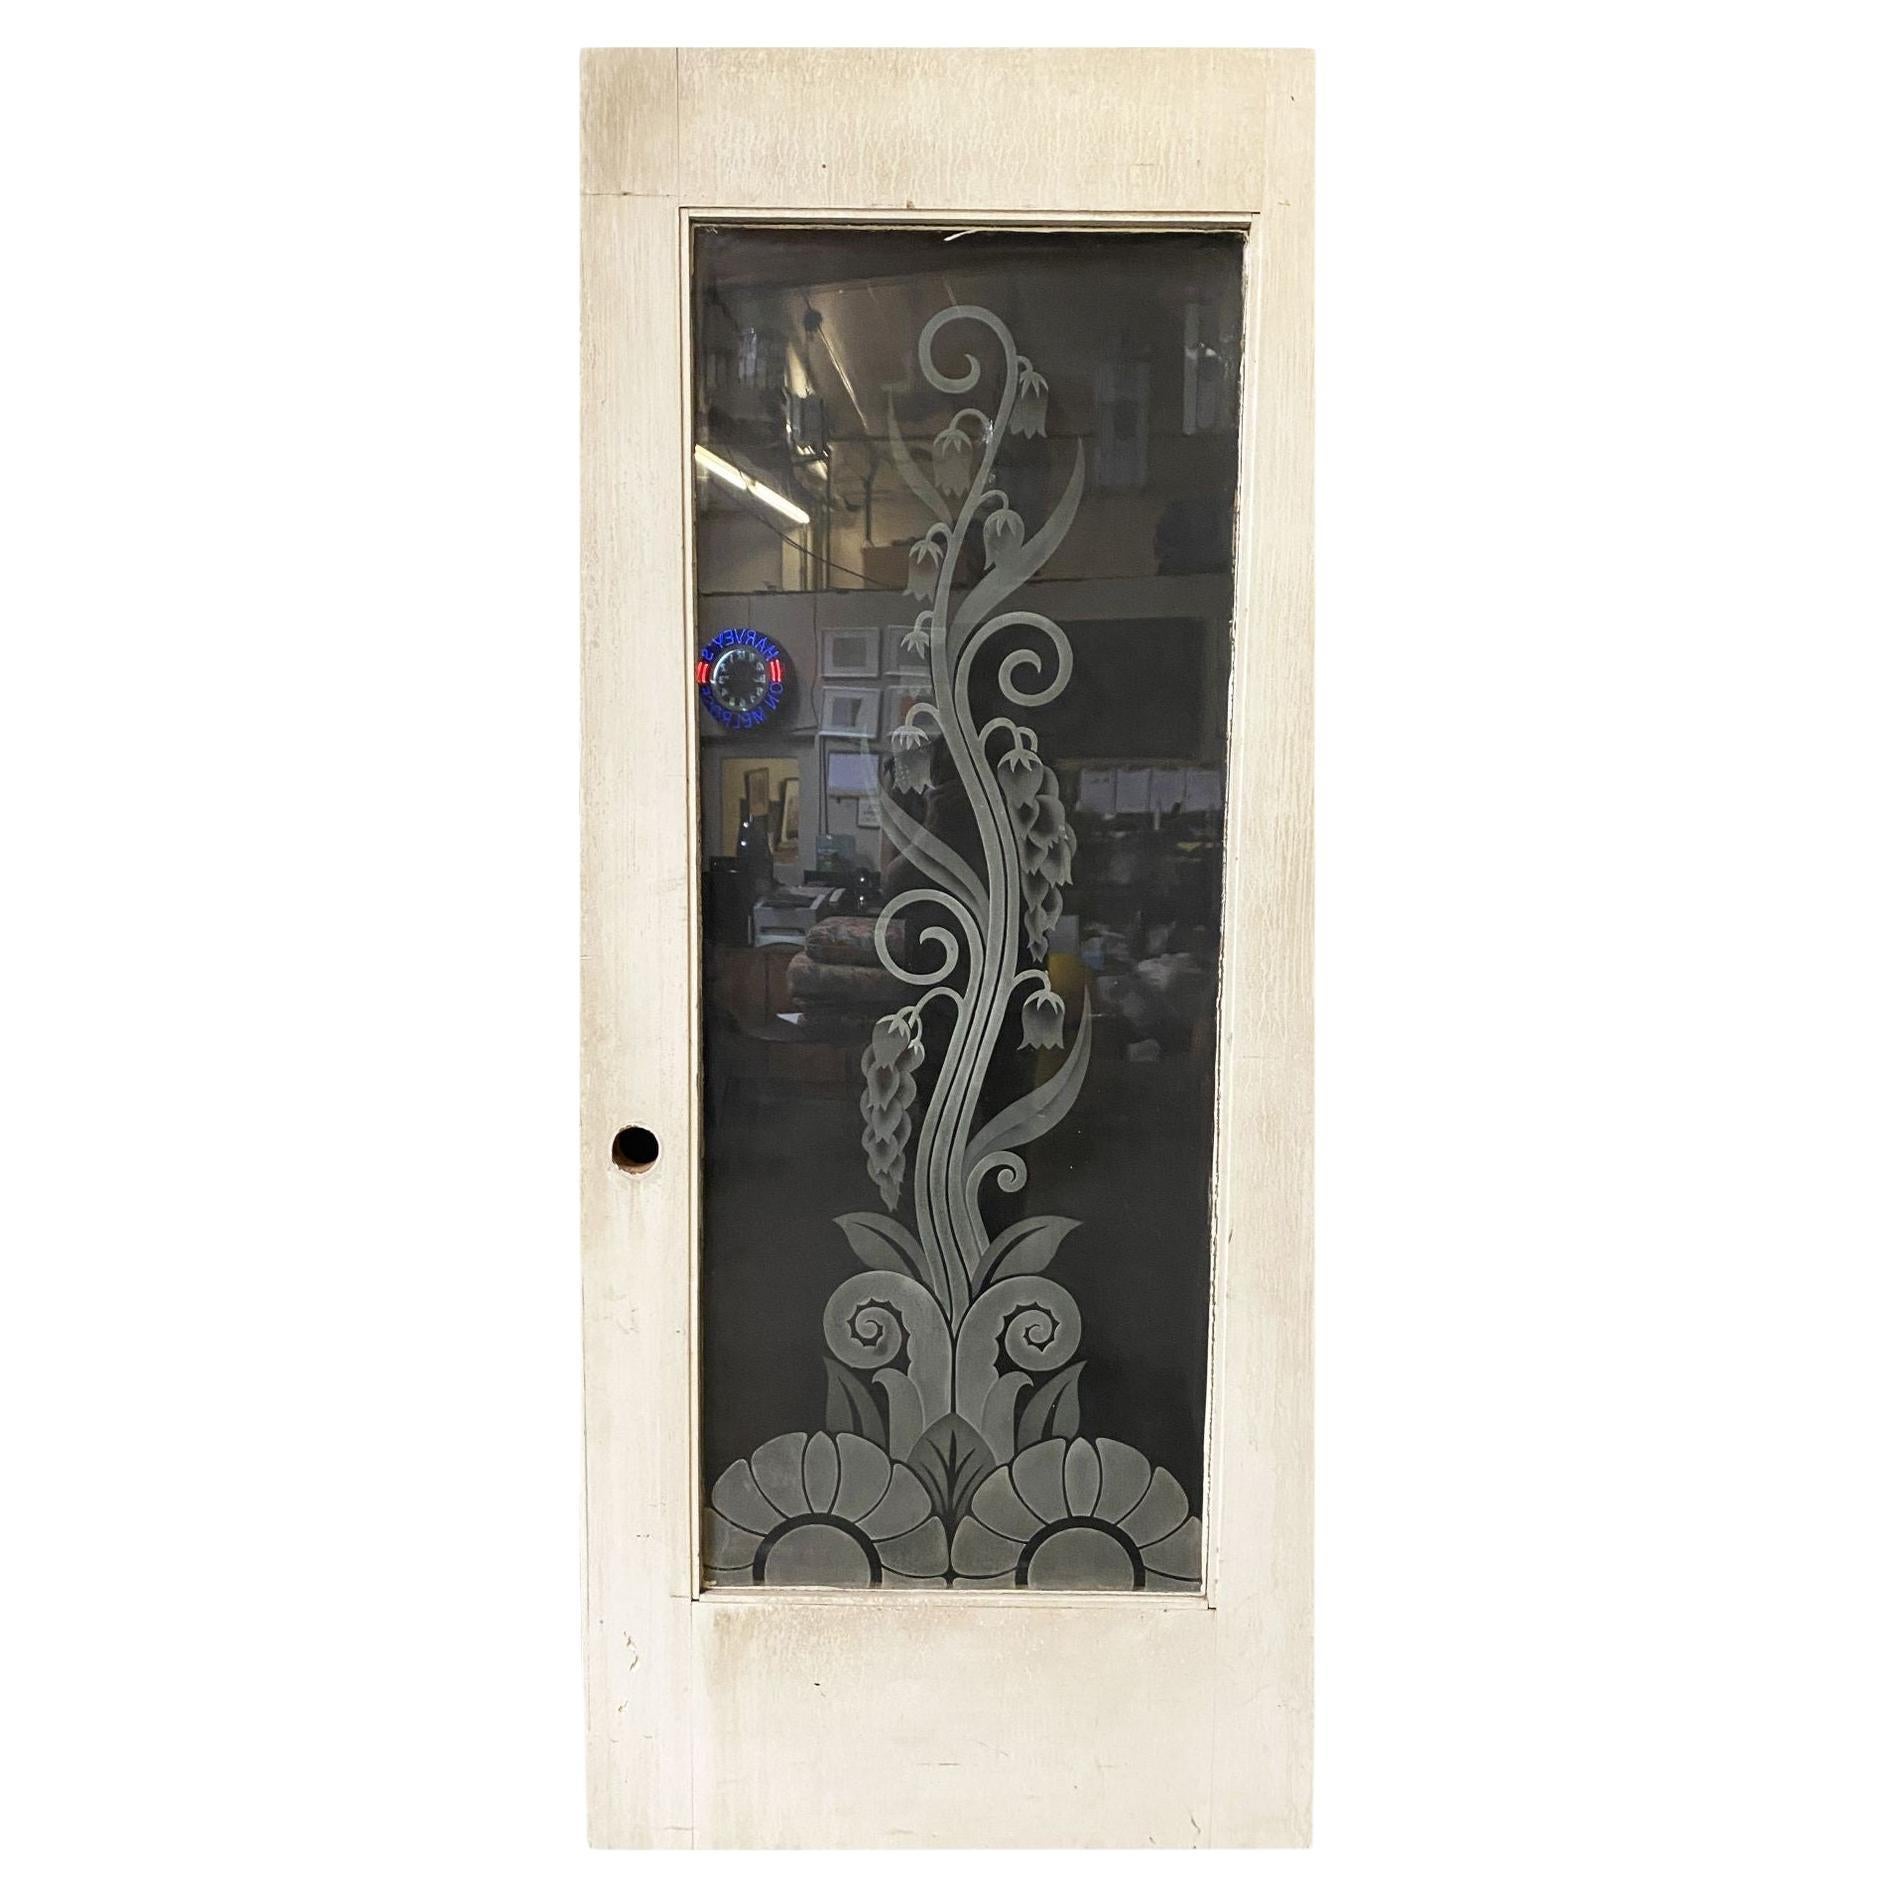 Hand Etched Organic Patterned Art Deco Door, Circa 1920 For Sale